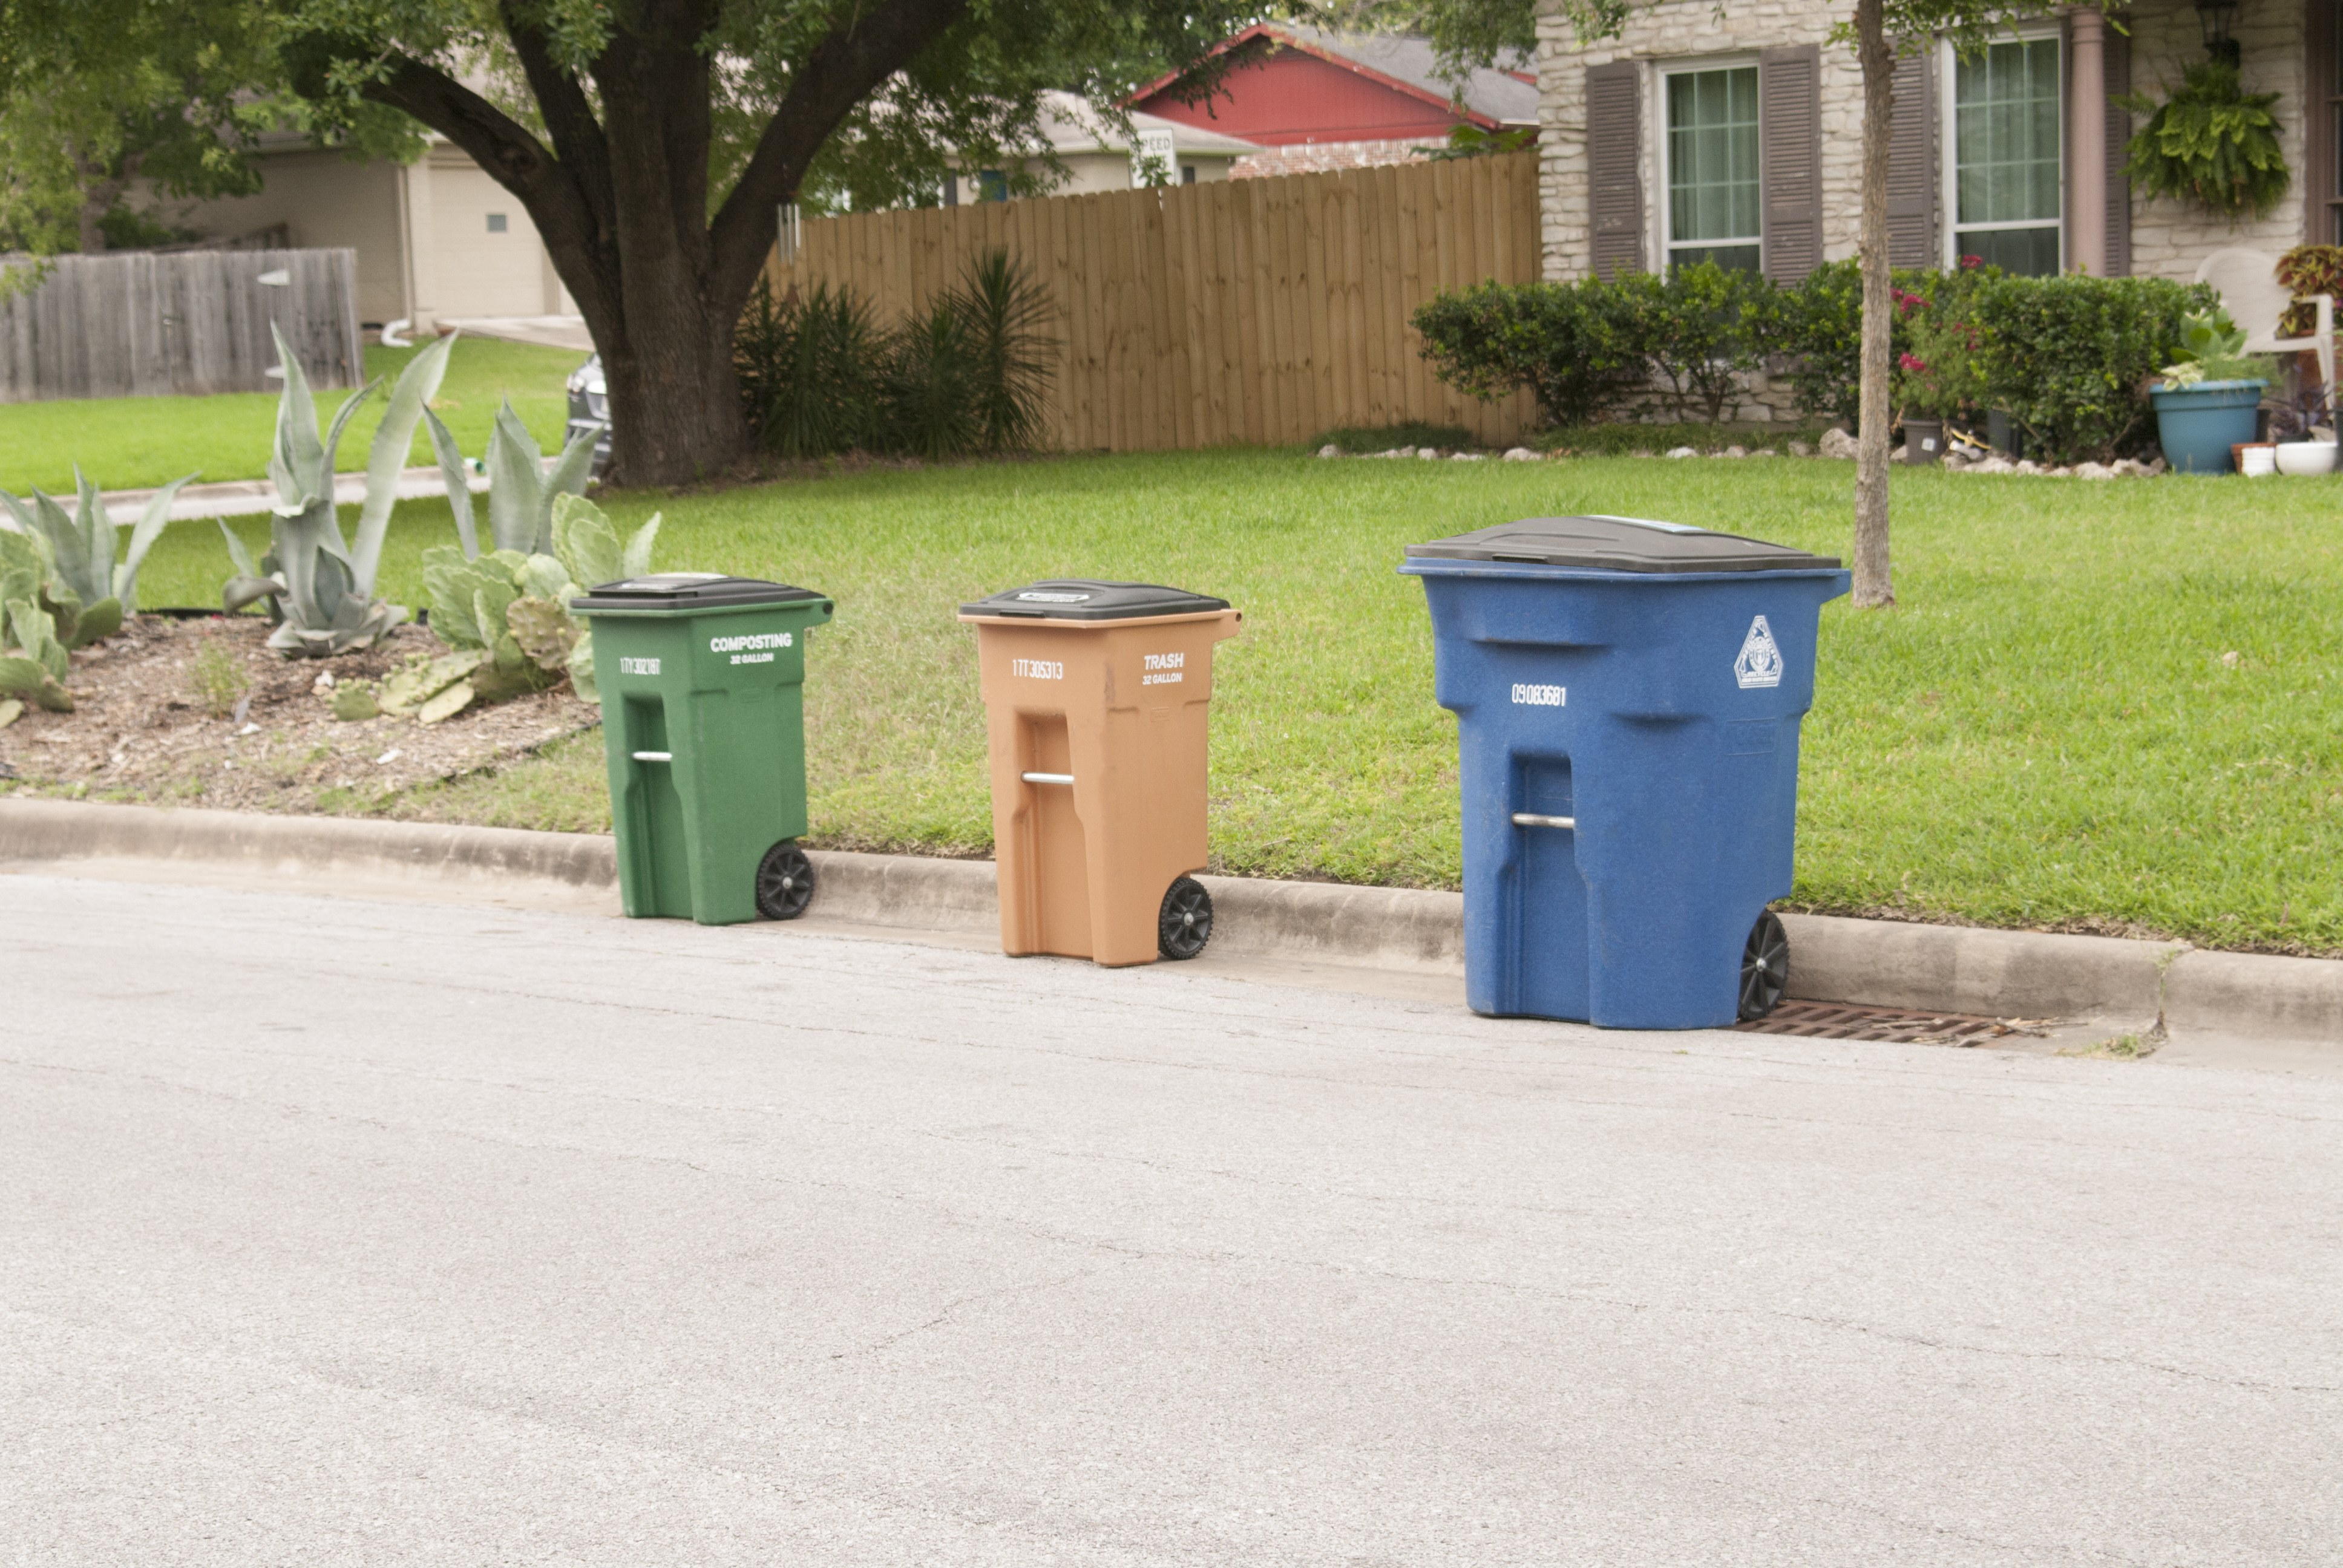 Compost, trash and recycling carts at the curb